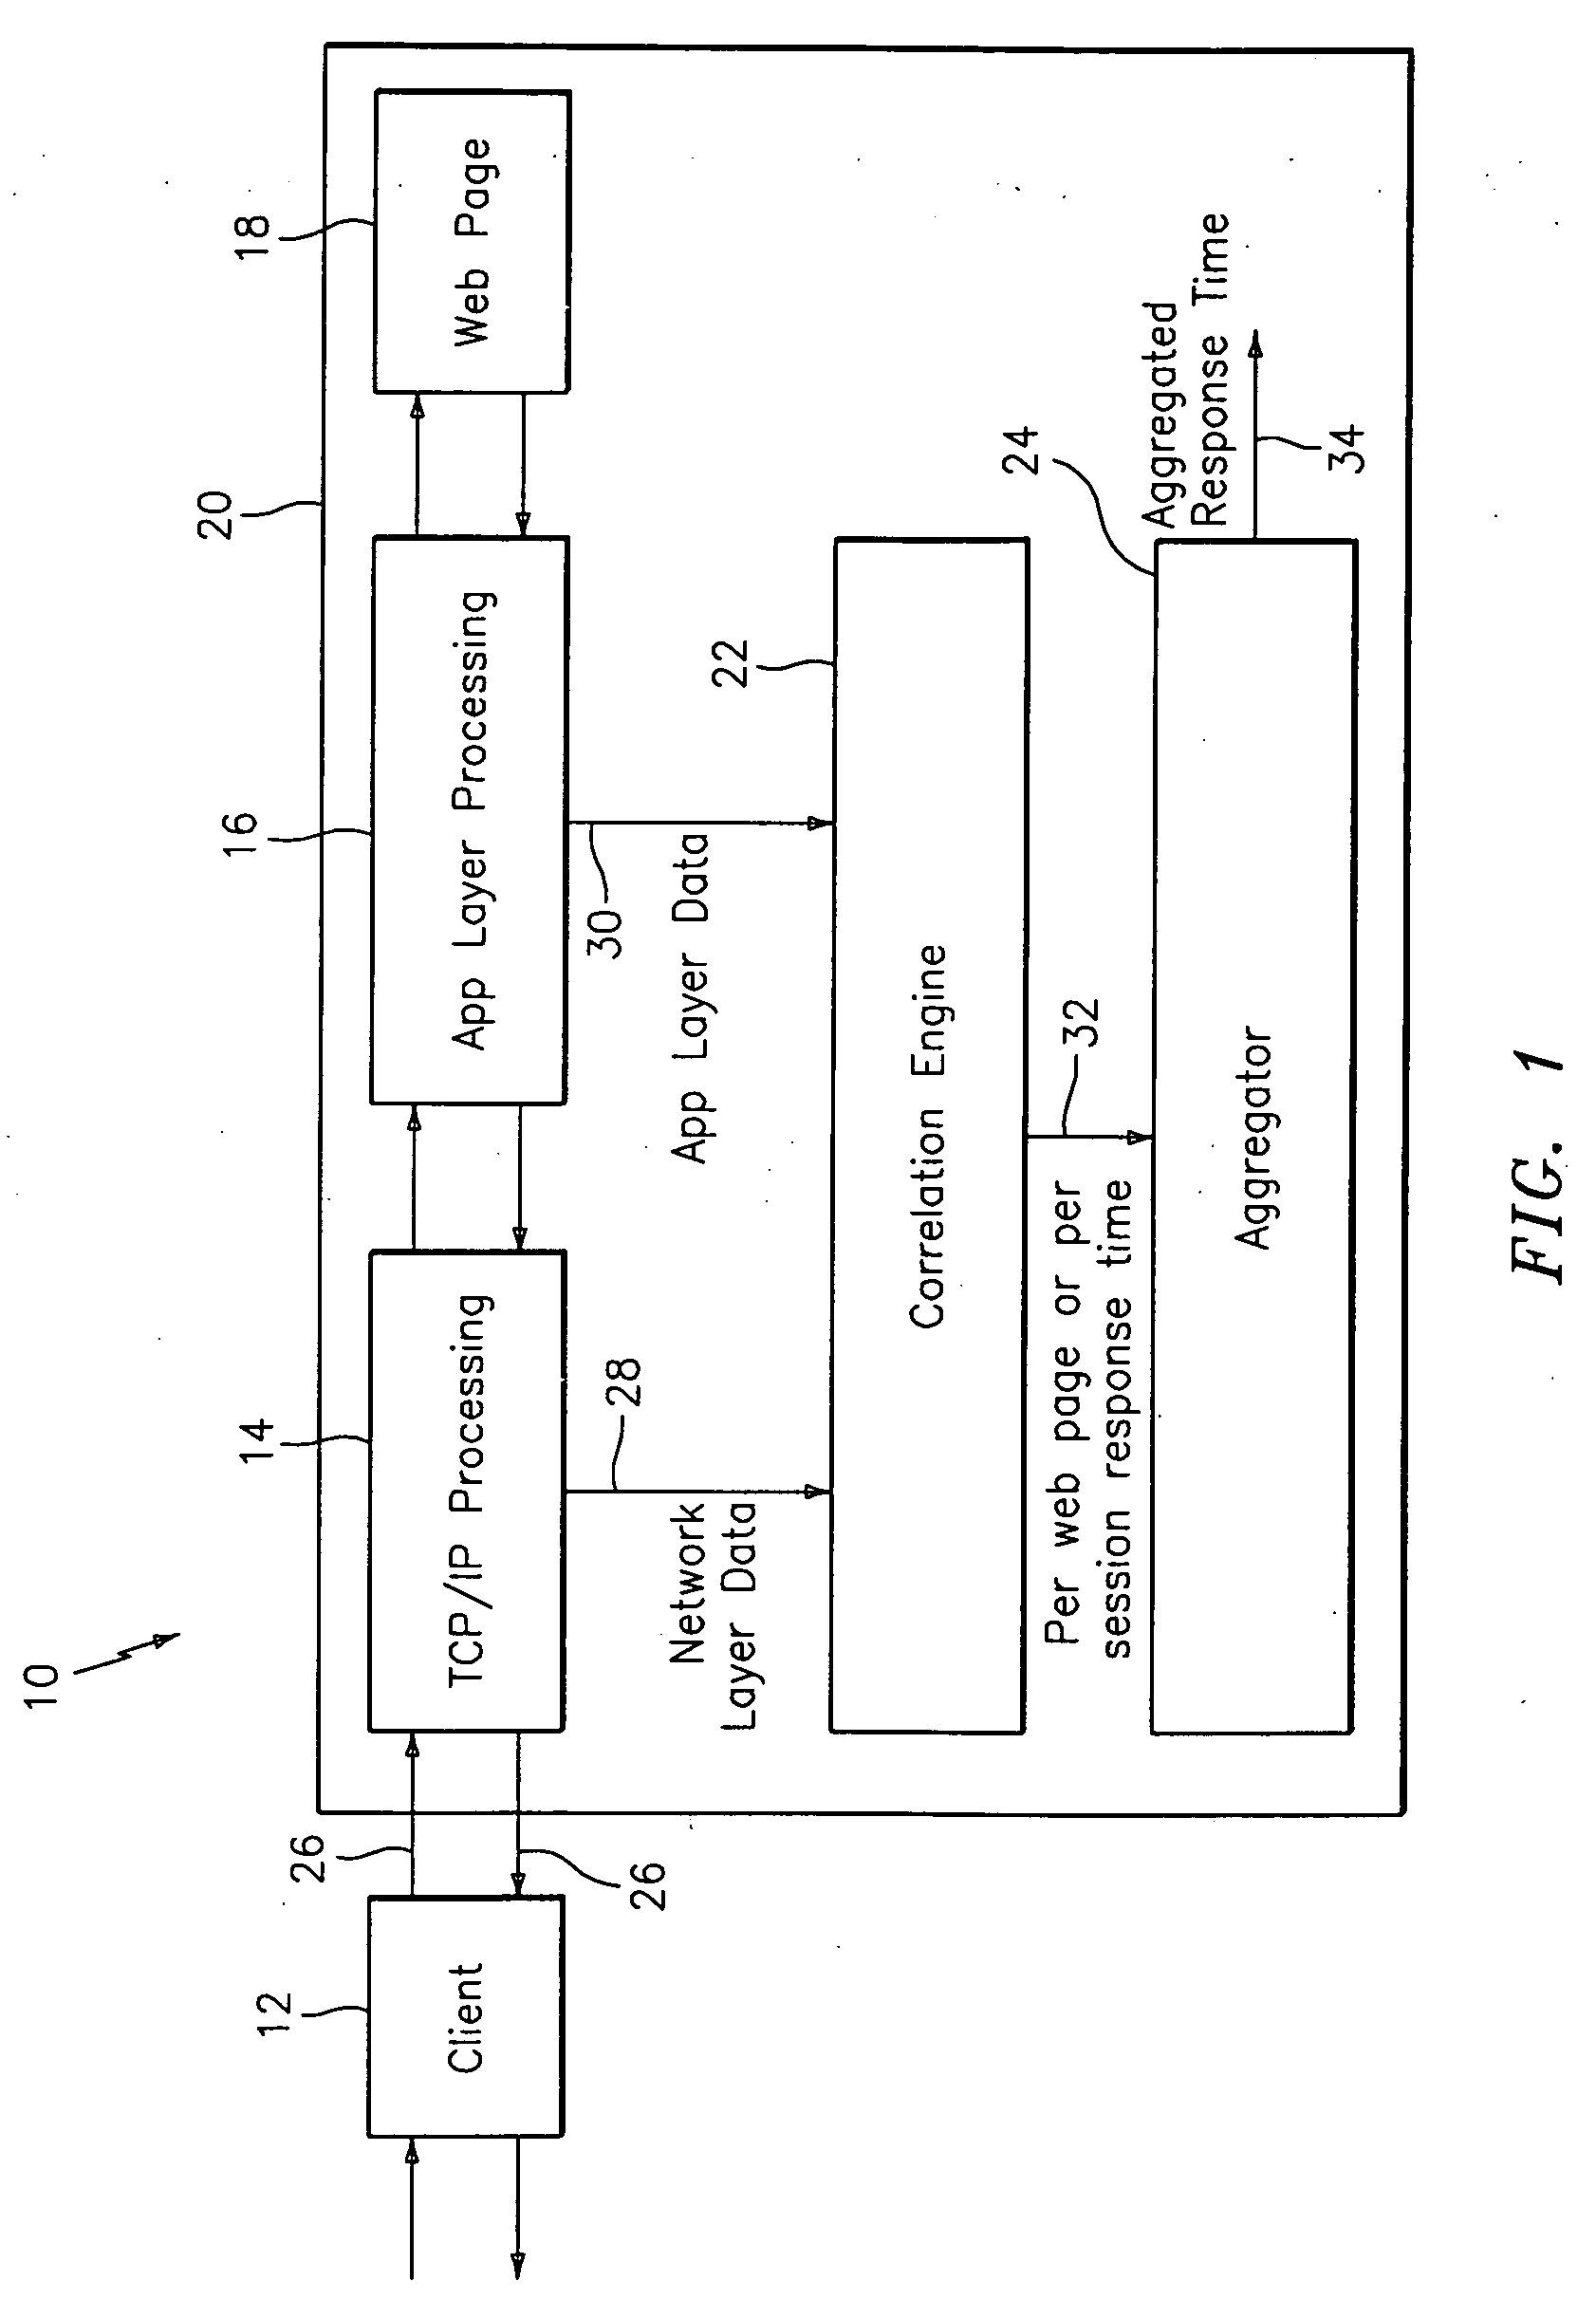 Method and apparatus to estimate client perceived response time